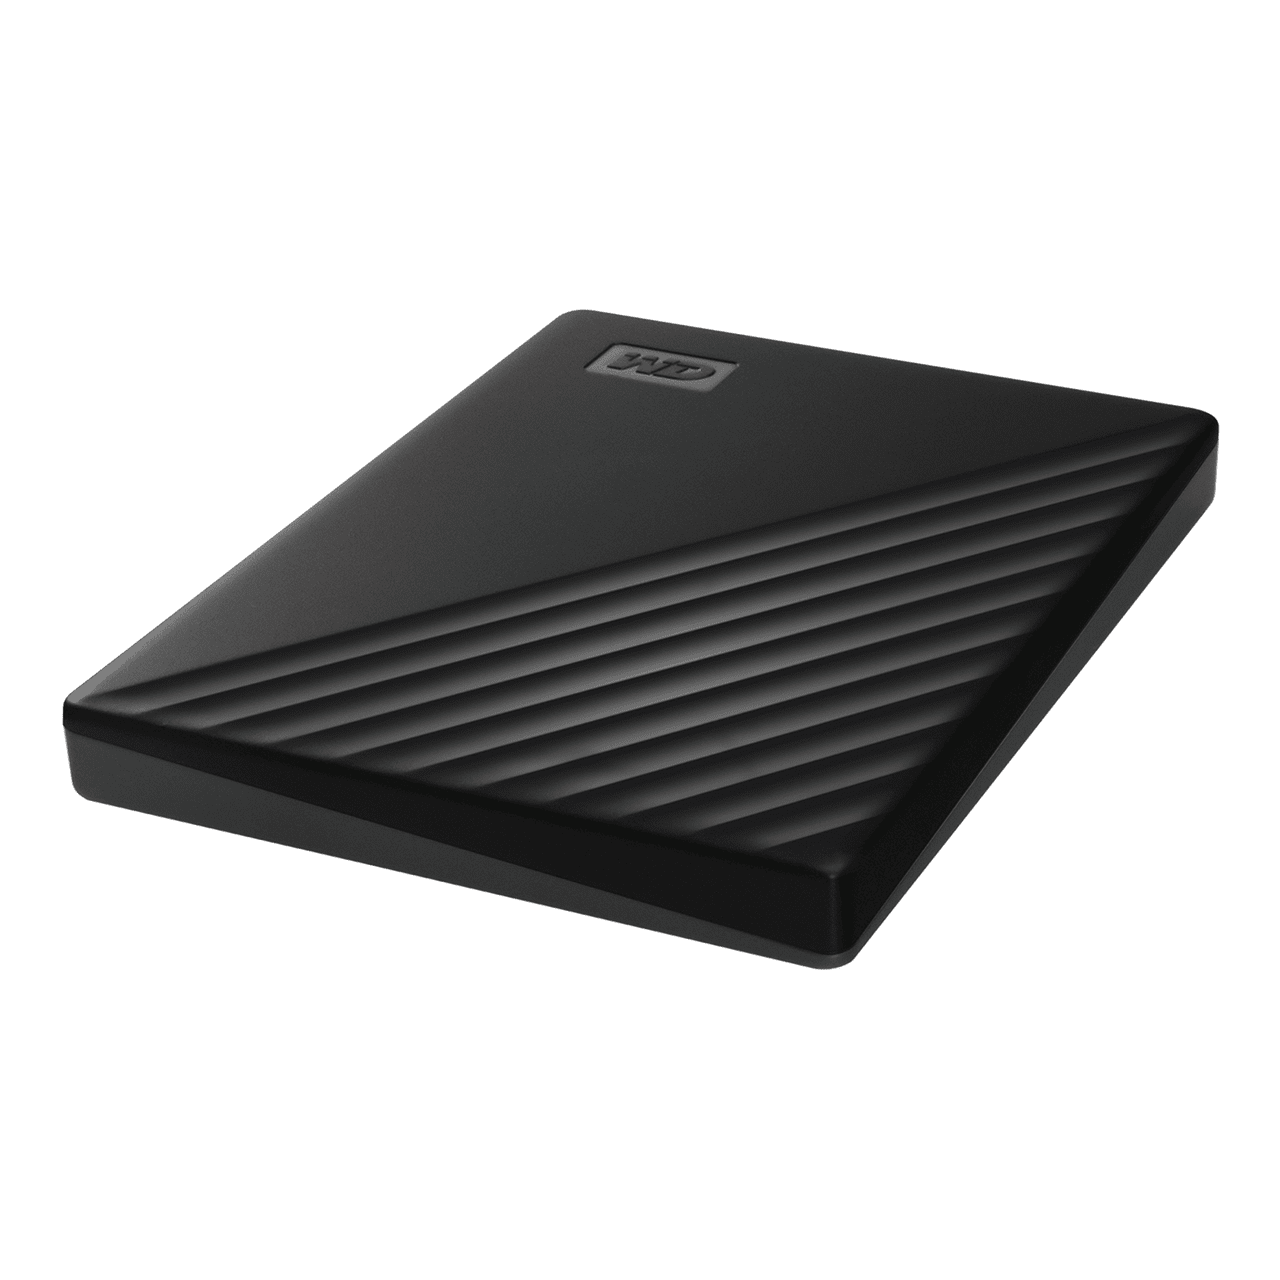 WD Western Digital My Passport 1TB Slim Portable External Hard Disk USB 3.0 With WD Backup Software & Password Protection